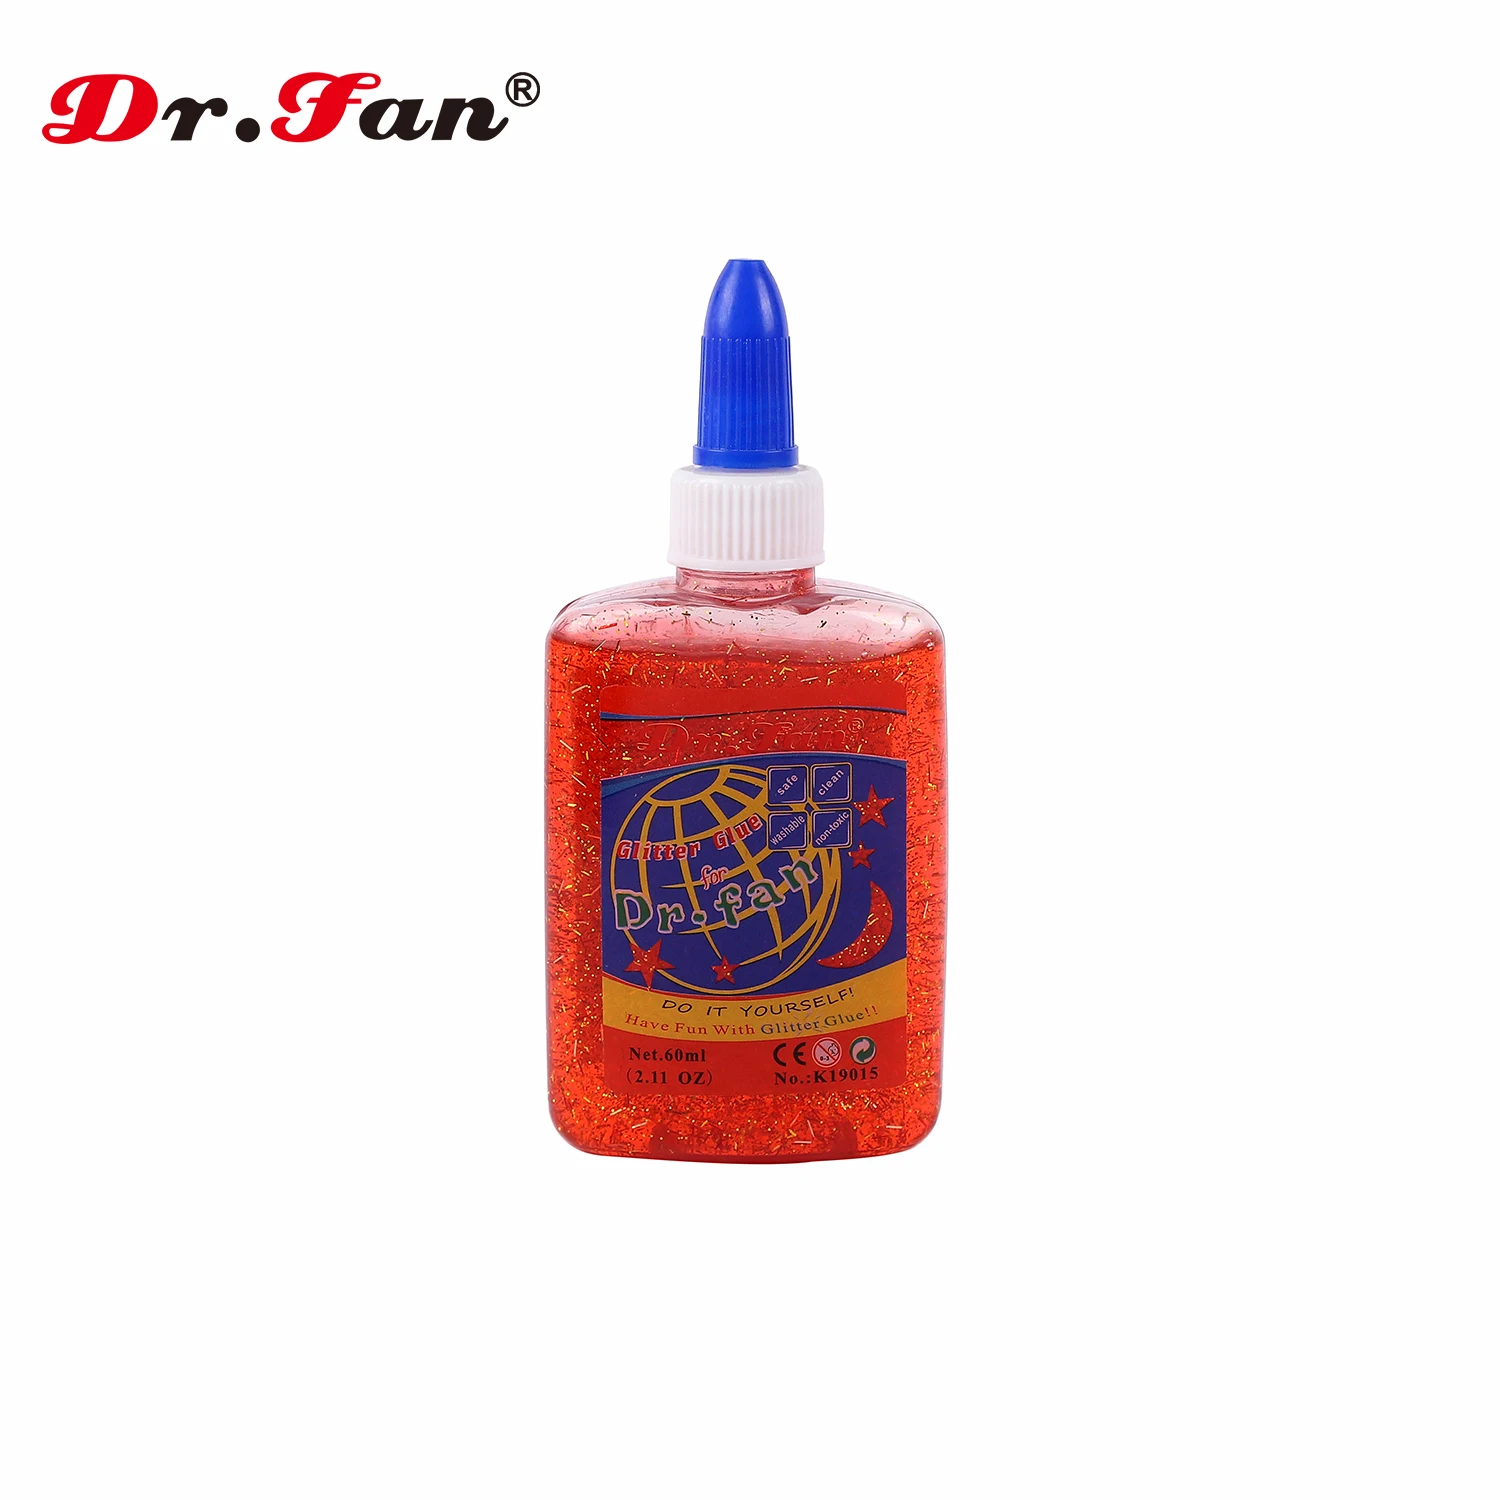 
Dr.fan 150ml white liquid Glitter Glue for resin slime charms air compressor parts container 8oz 